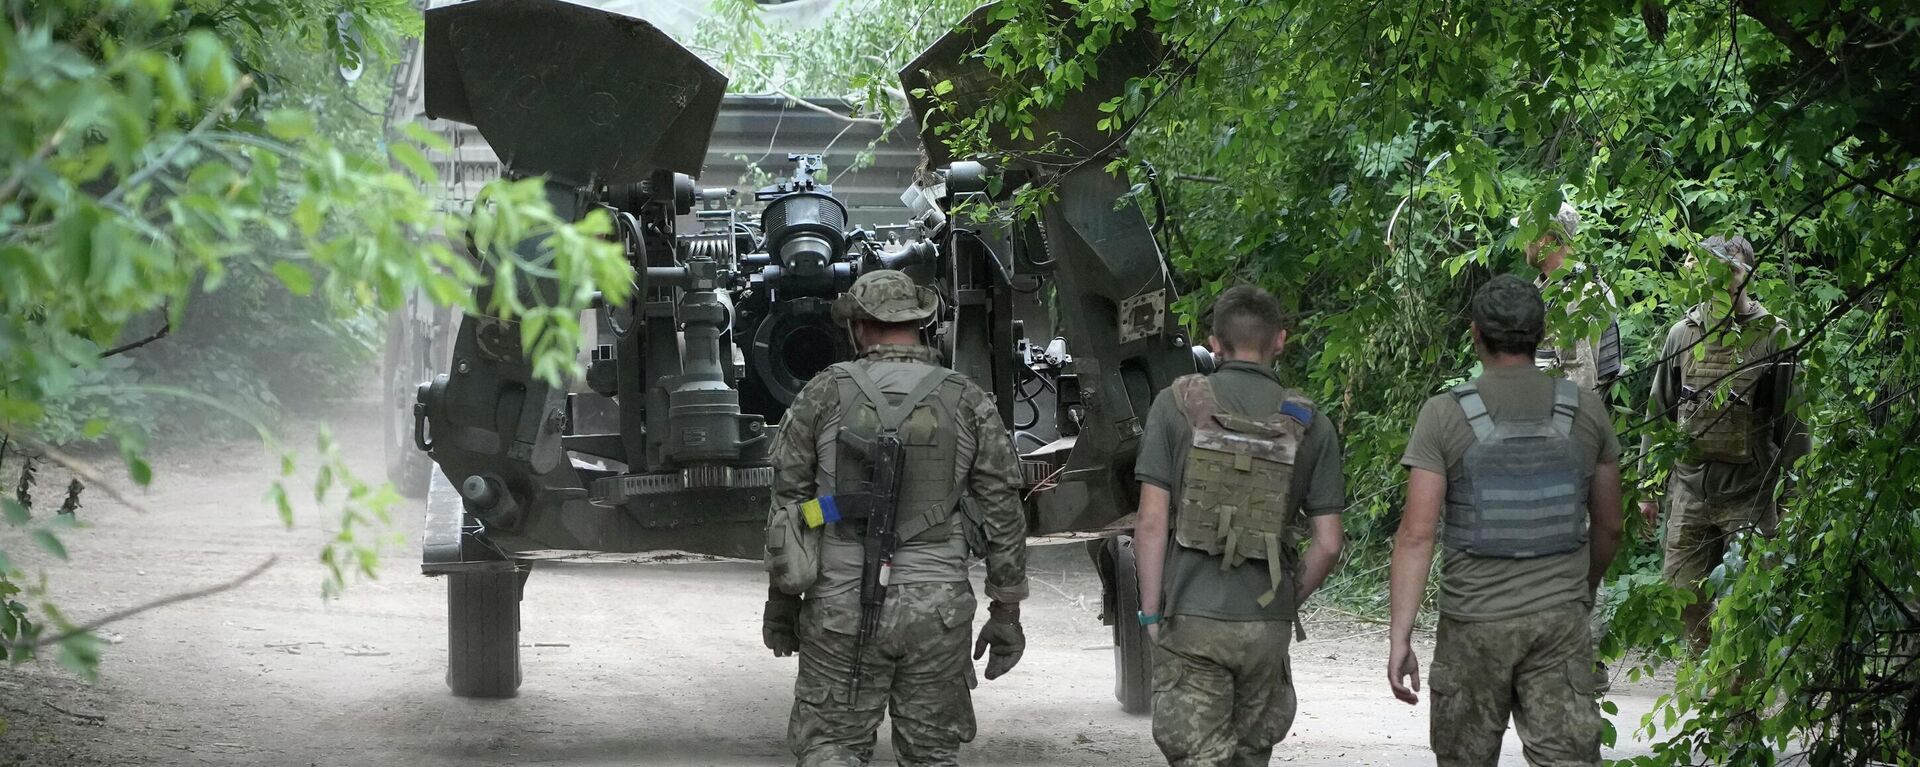 Ukrainian soldiers move a U.S.-supplied M777 howitzer into position to fire at Russian positions in Ukraine's eastern Donbas region Saturday, June 18, 2022 - Sputnik International, 1920, 09.06.2023